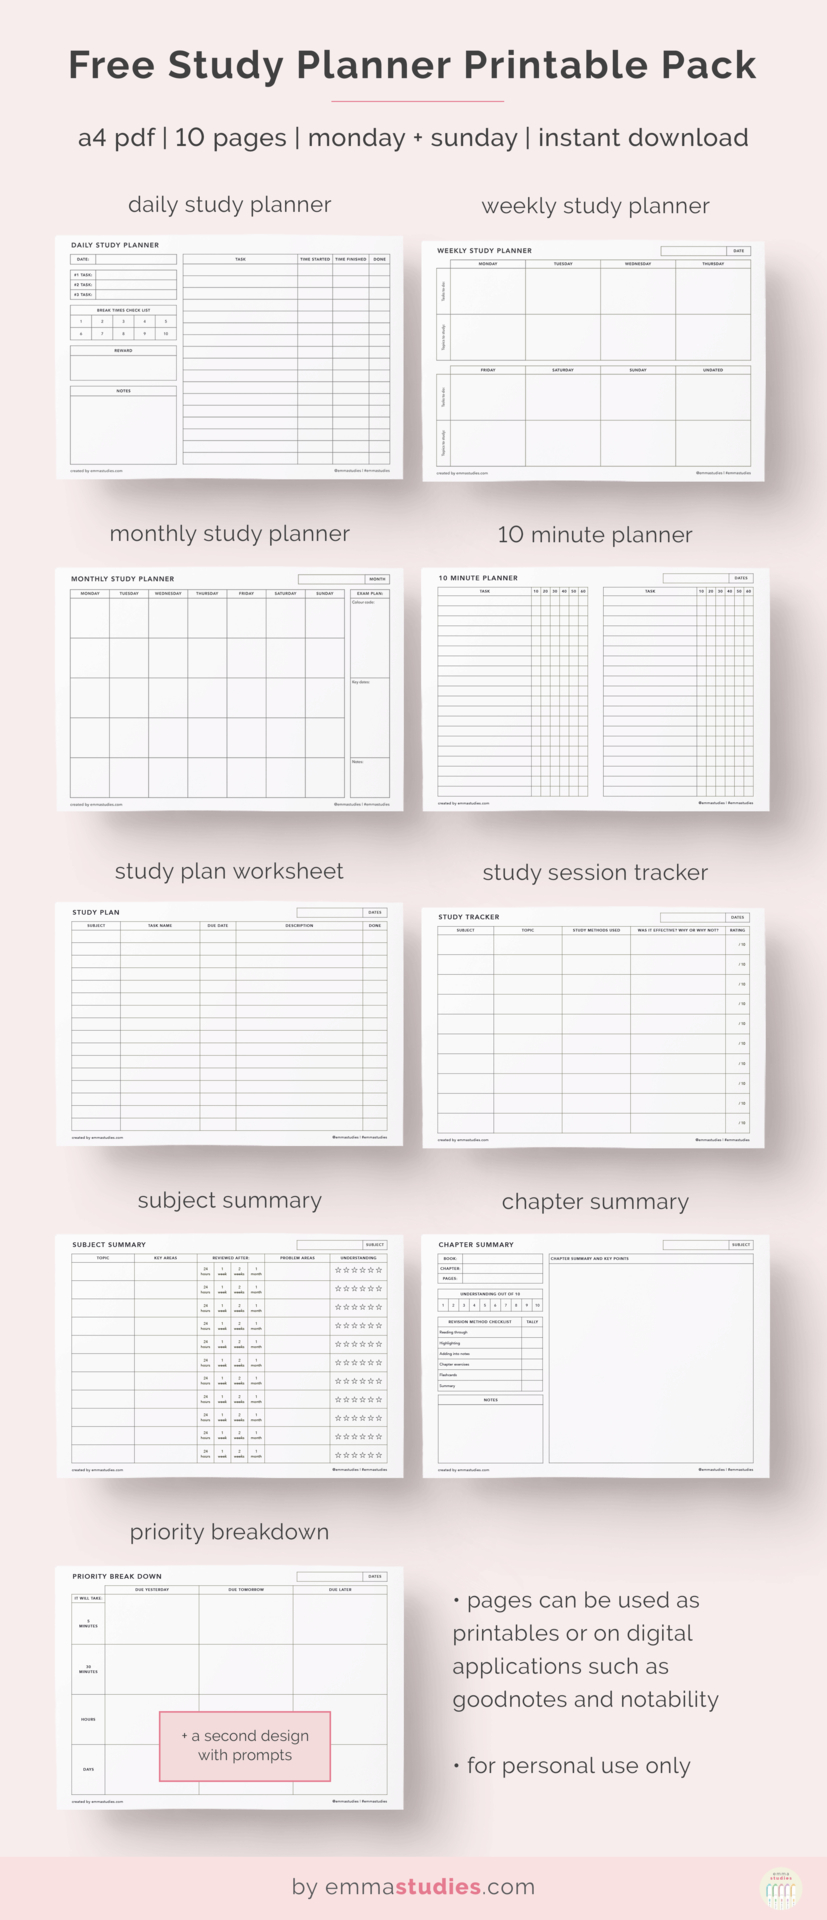 Emma&#039;s Studyblr — Free Study Planning Printable Pages! Here